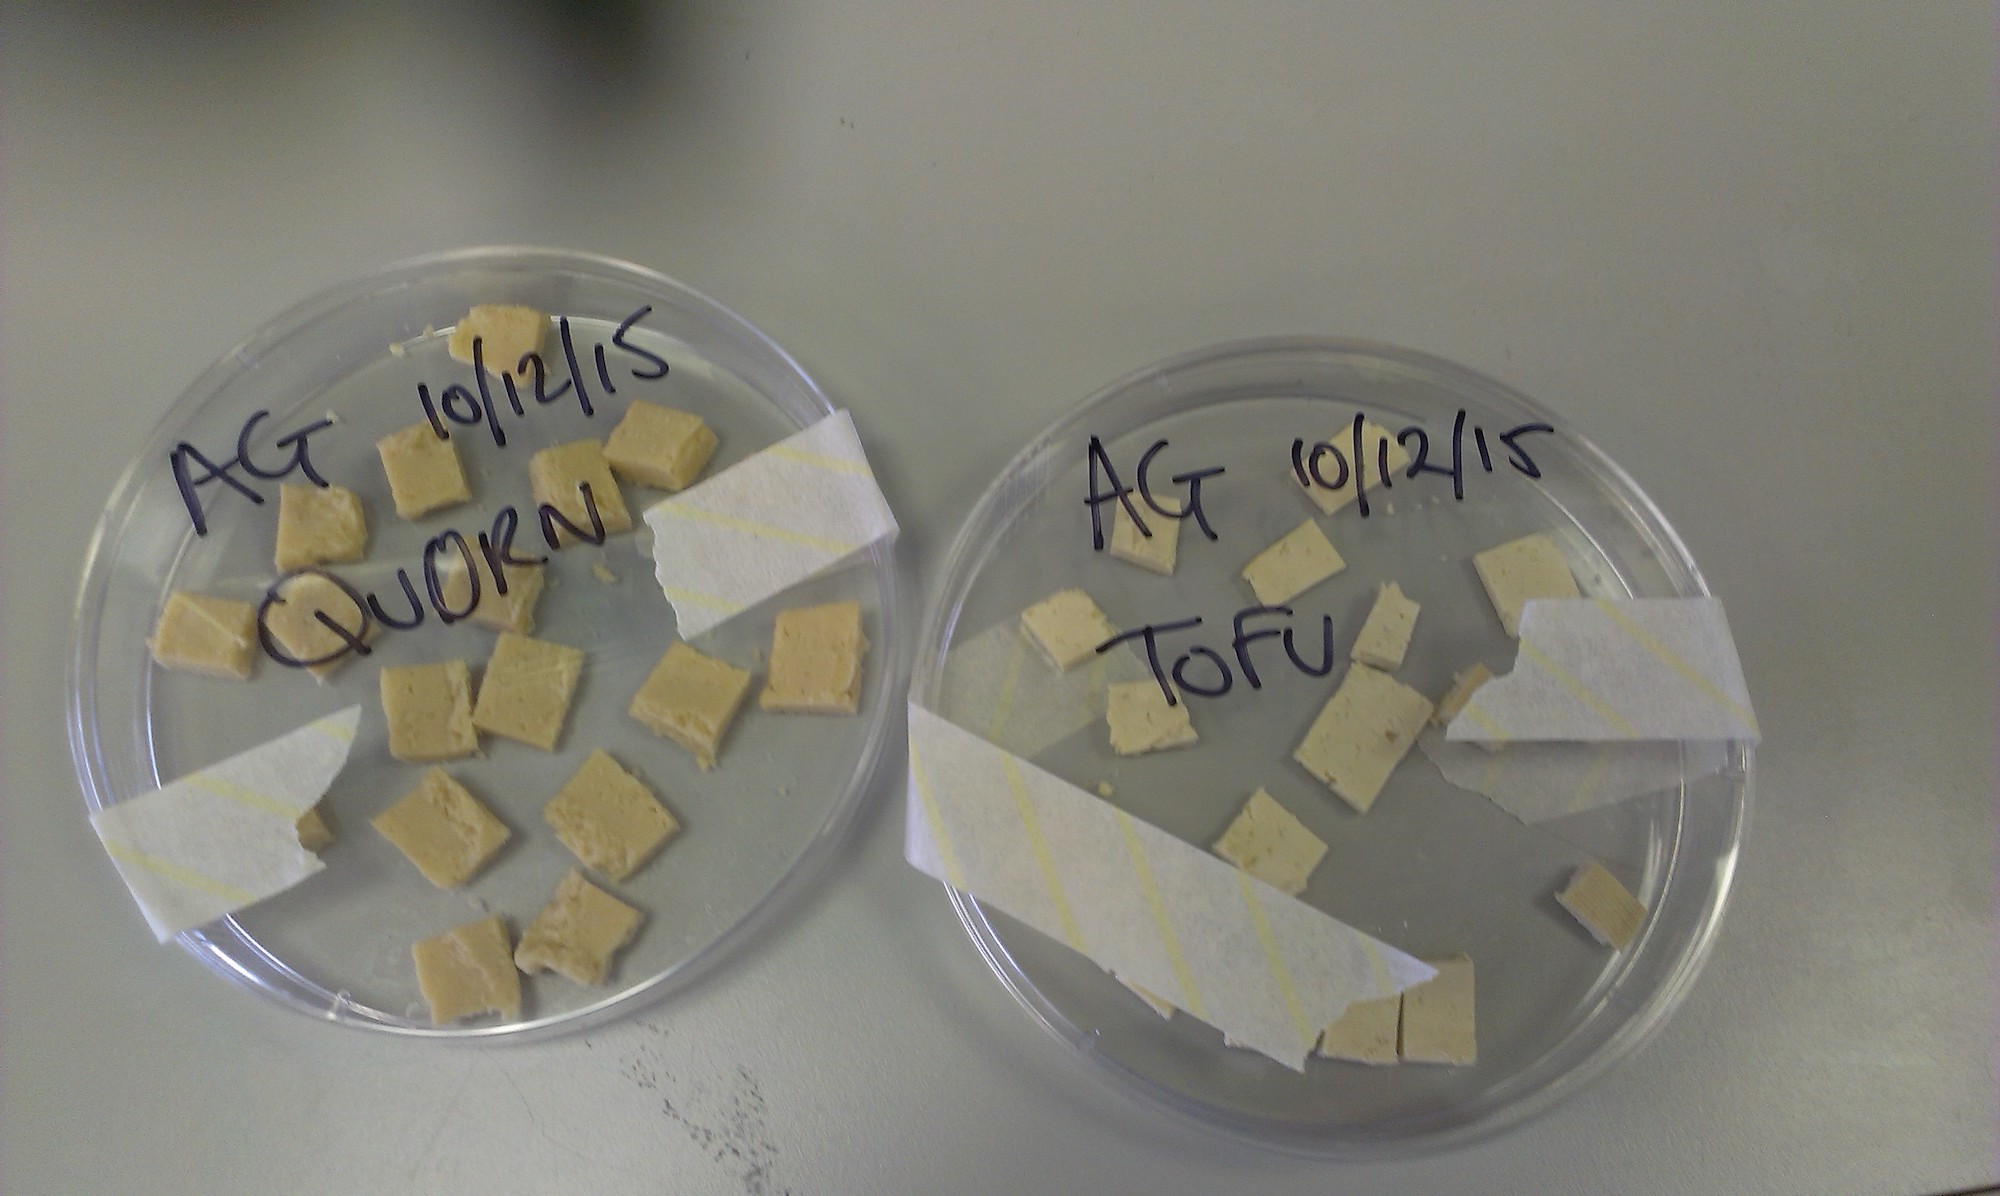 2 filled petri dishes, one that is labled "AG 10/12/15 QUORN" and the other "AG 10/12/15 TOFU"